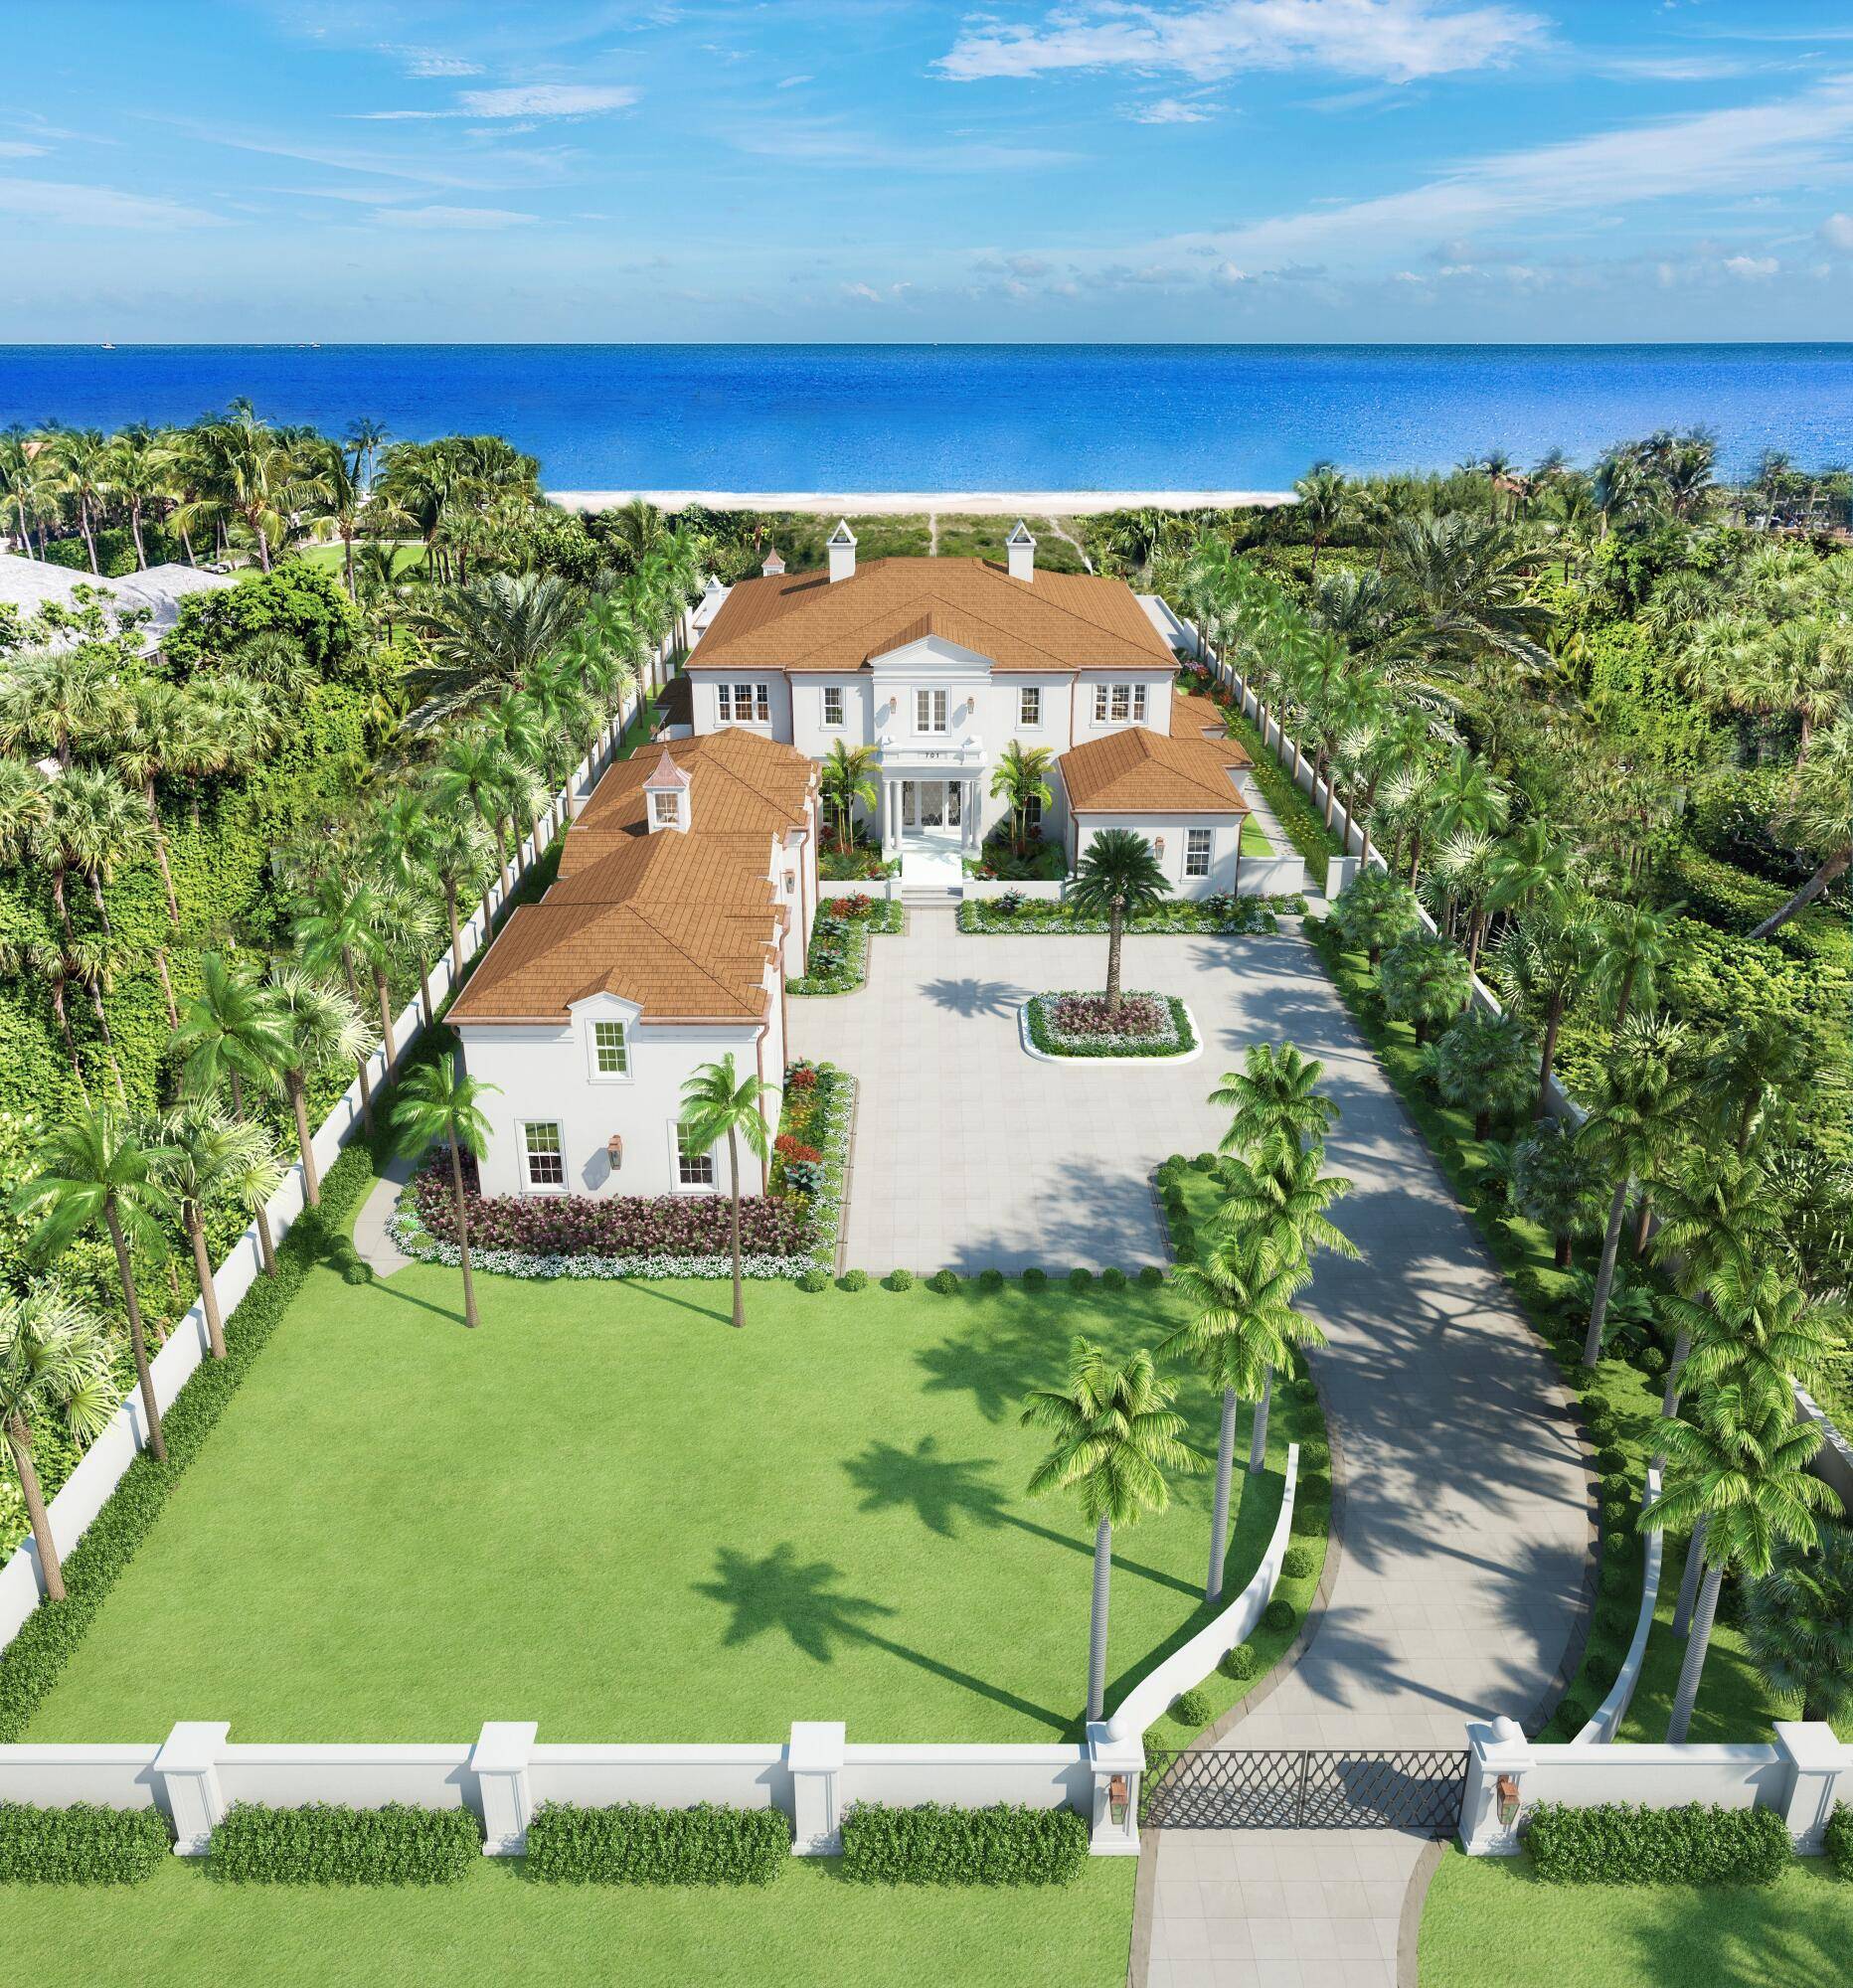 Luxury and serene beauty abound in this stunning new direct oceanfront estate created by an esteemed Gold Coast builder.